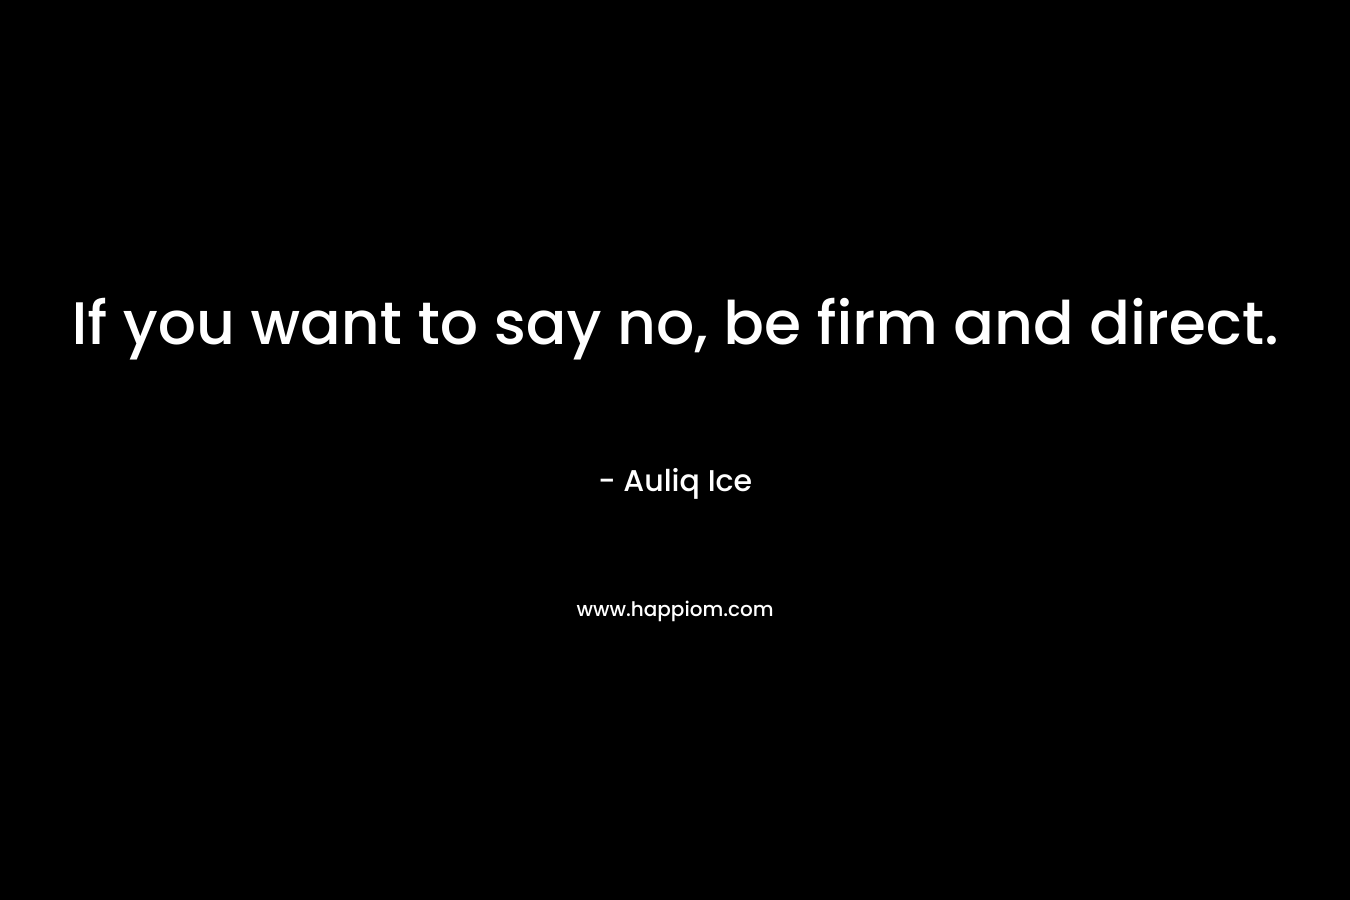 If you want to say no, be firm and direct. – Auliq Ice